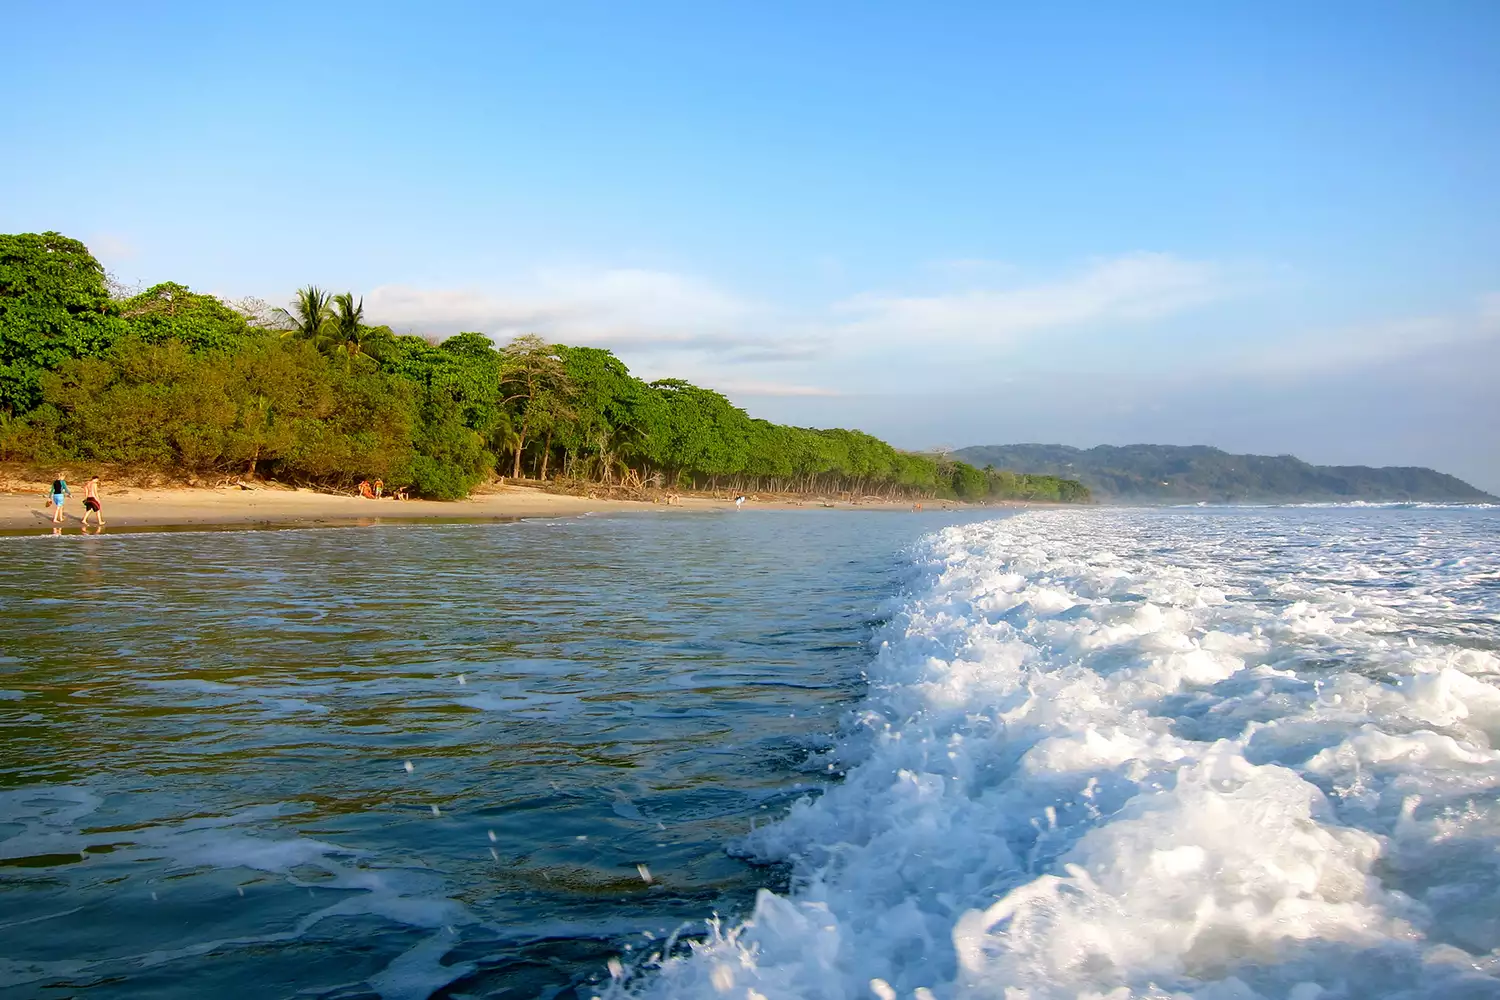 Beautiful beaches, top-notch surfing, and breathtaking sunsets can be found in this laid-back beach town in Costa Rica.